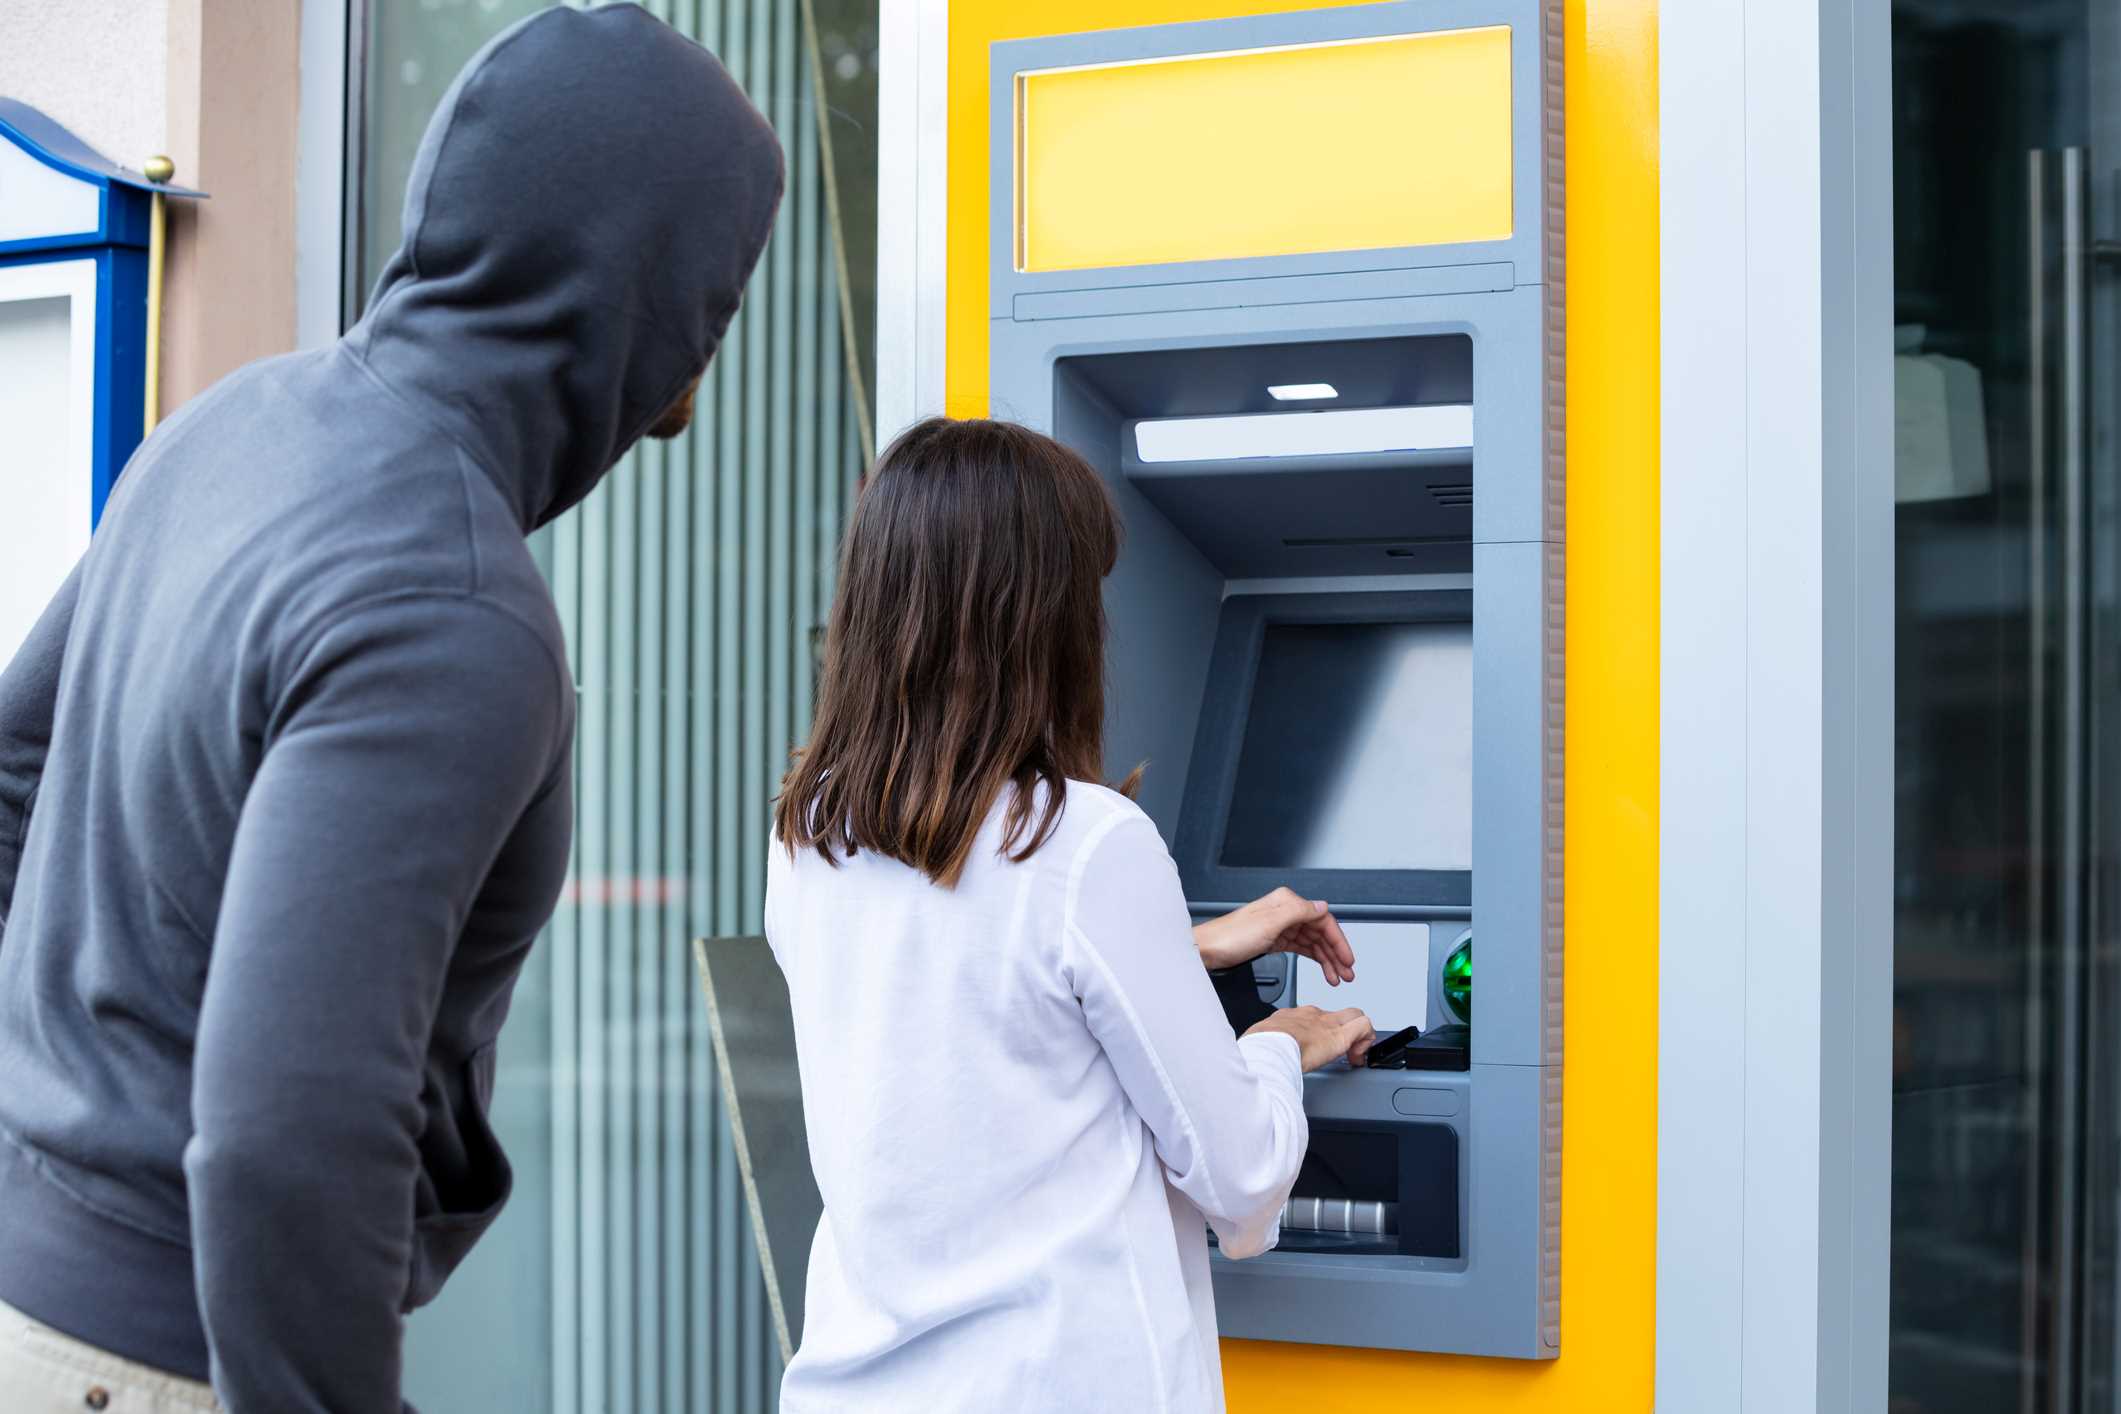 Woman using an outdoor bank ATM as a man in a hoodie behind her tries to see her PIN